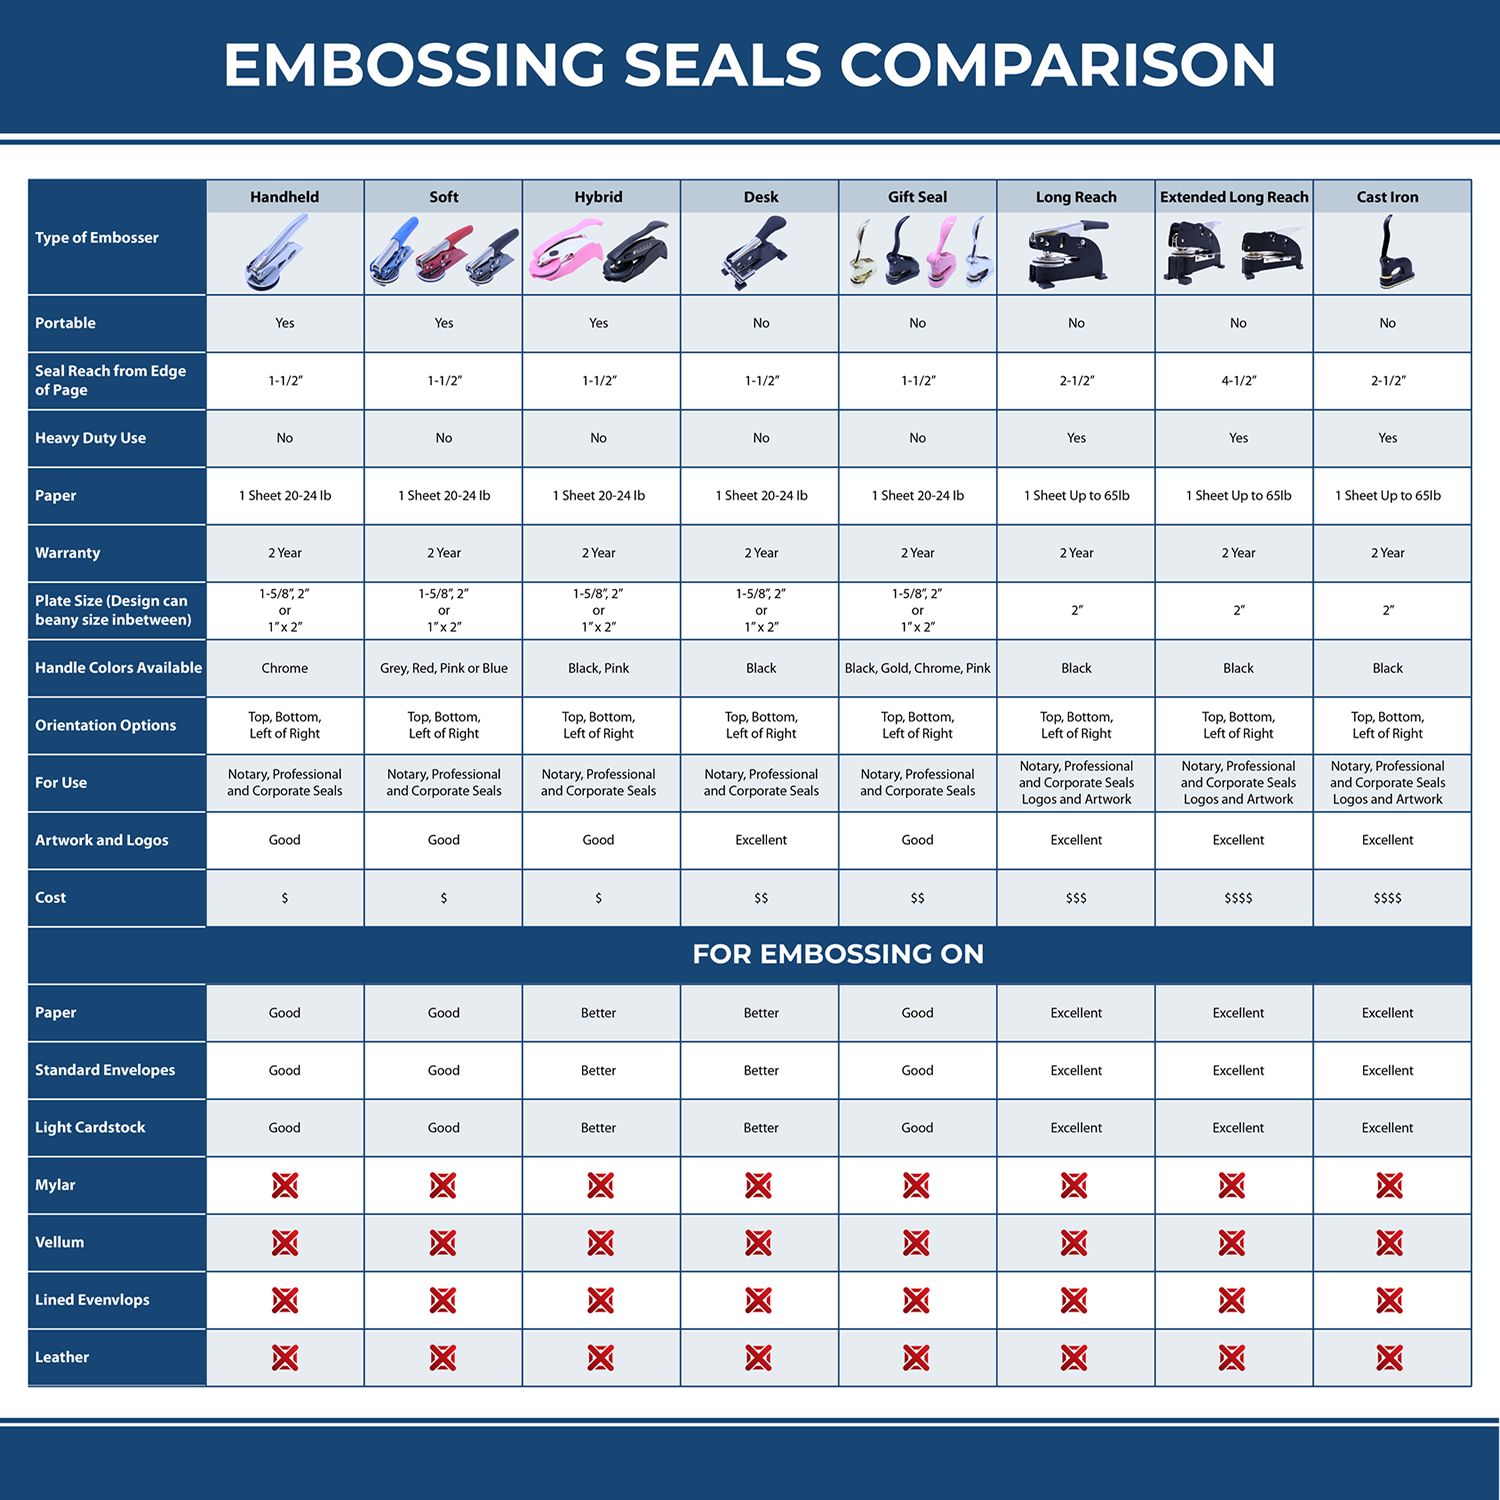 A comparison chart for the different types of mount models available for the Long Reach Tennessee Land Surveyor Seal.